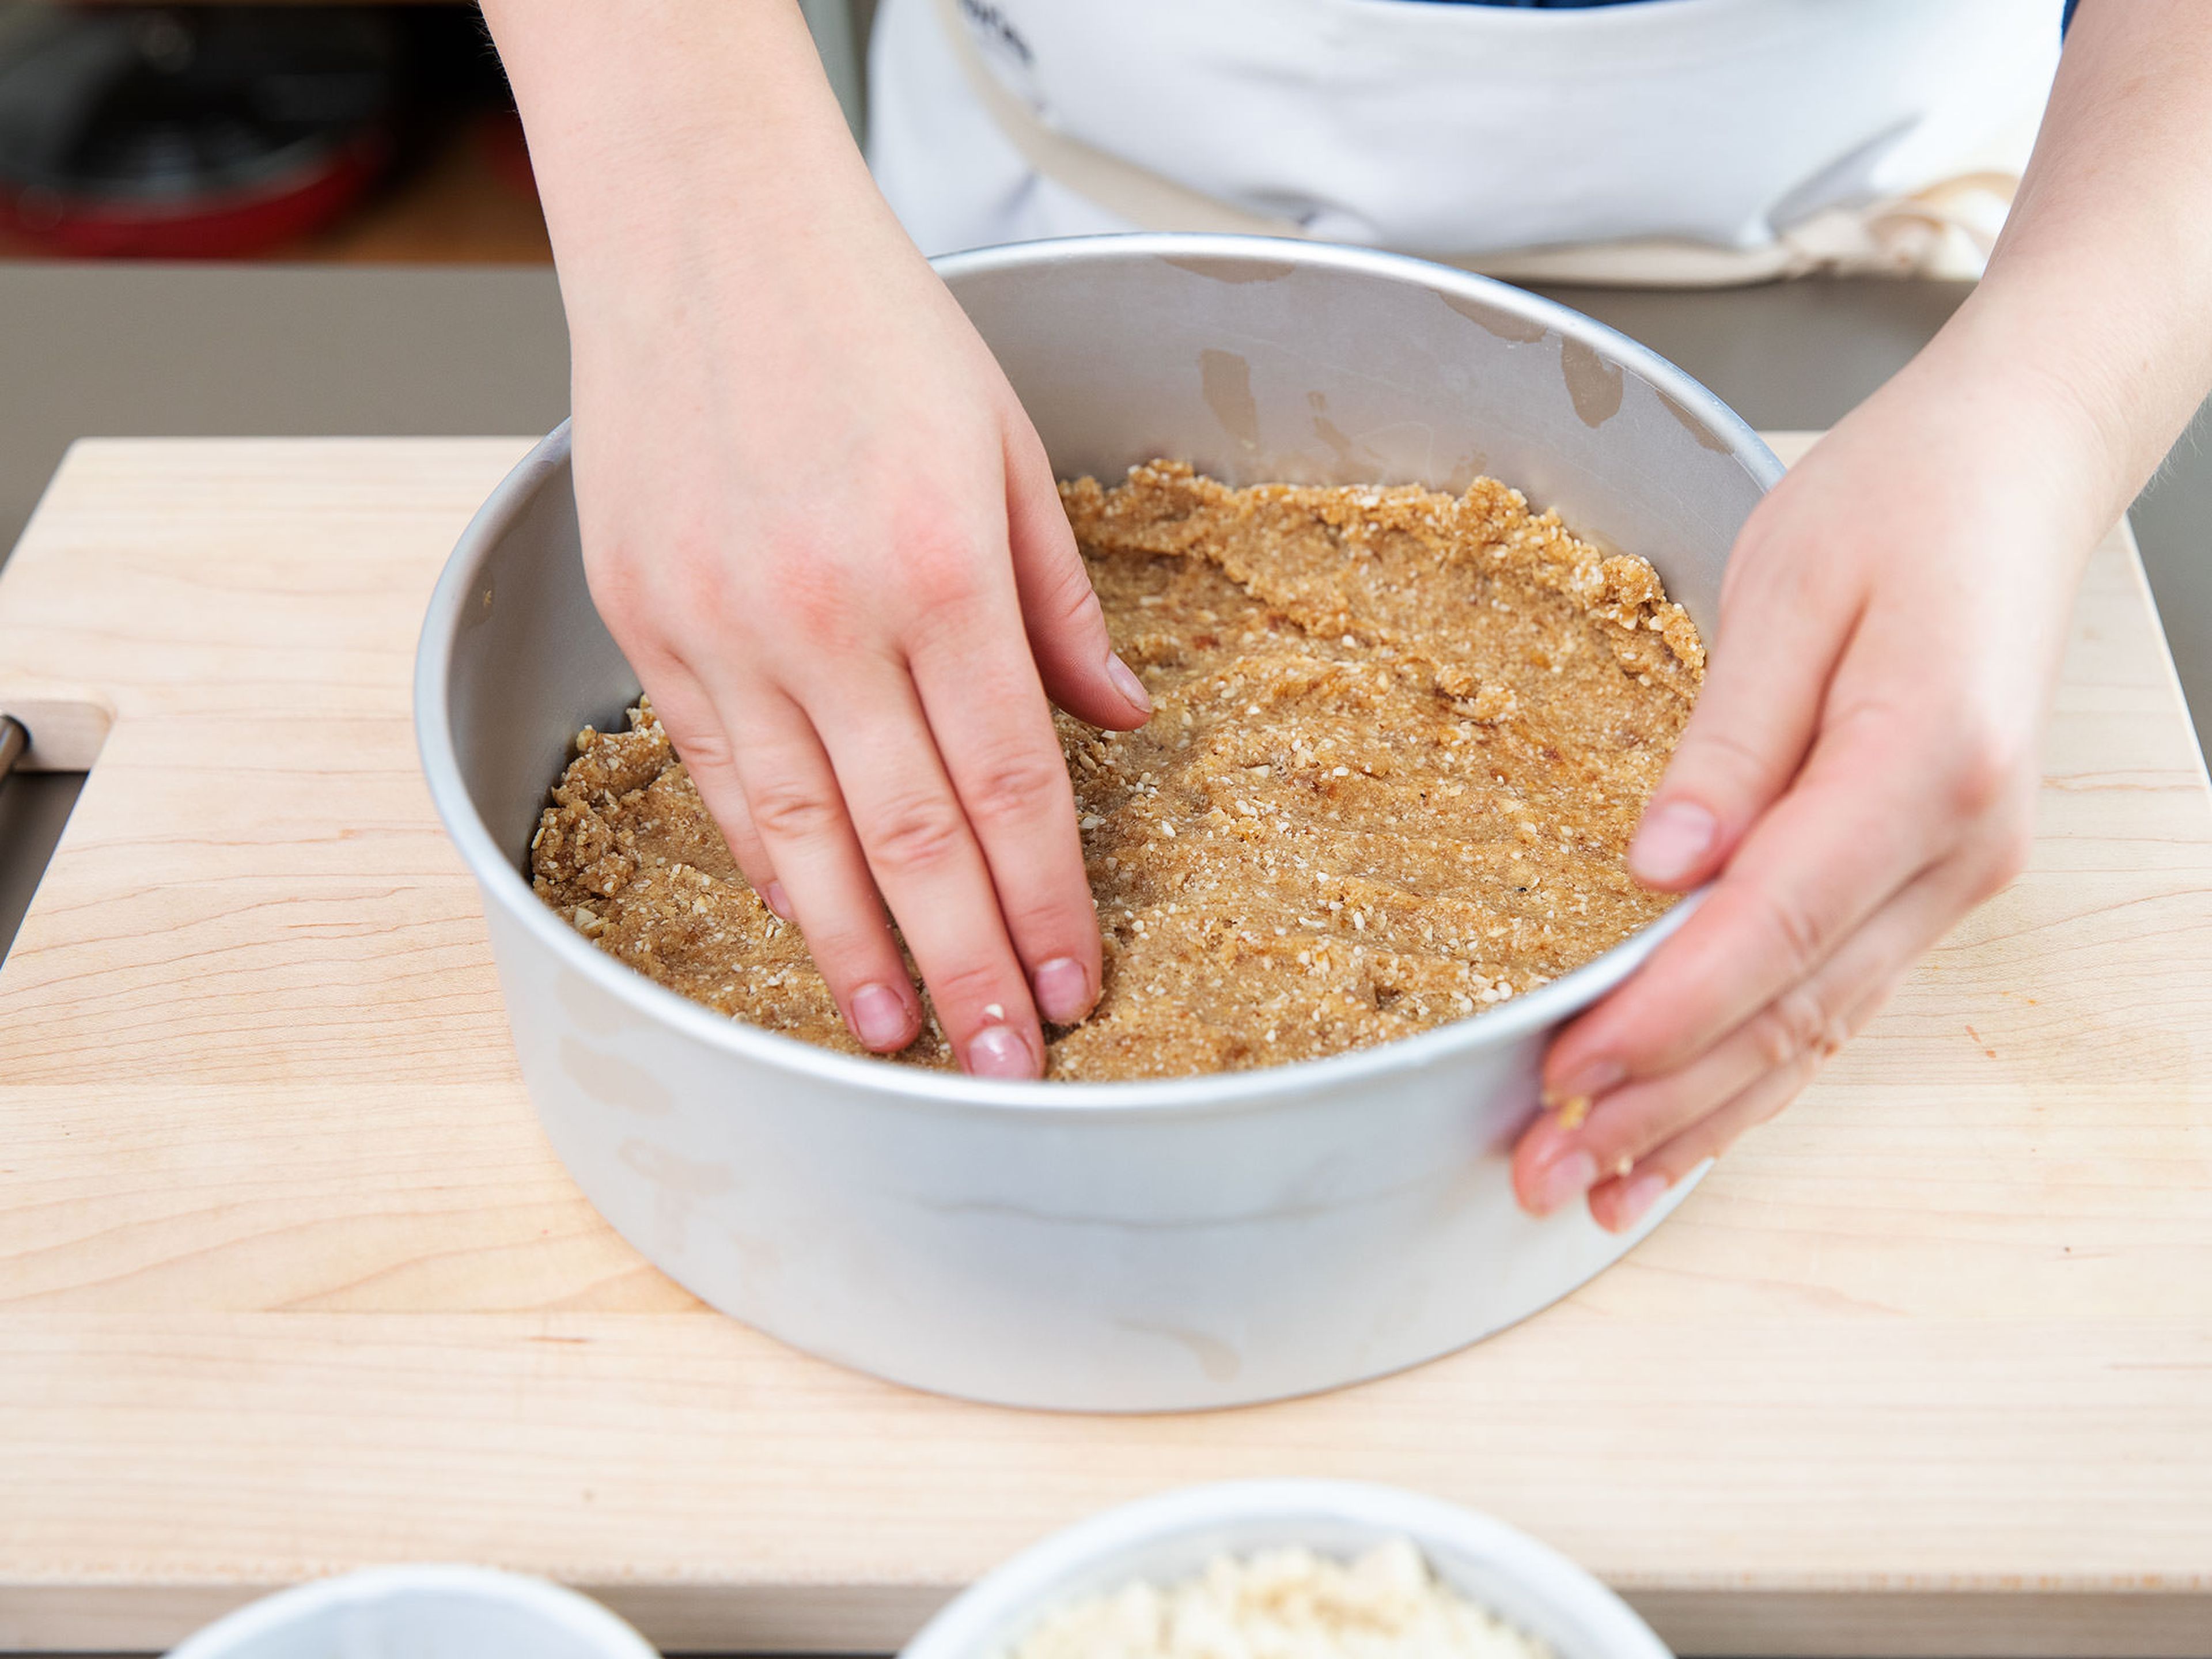 Transfer the date-cashew mixture into a baking pan or springform pan. Spread and press down firmly. Add ground almonds, maple syrup, and salt to a food processor. Process until smooth and spread on the tarte base.